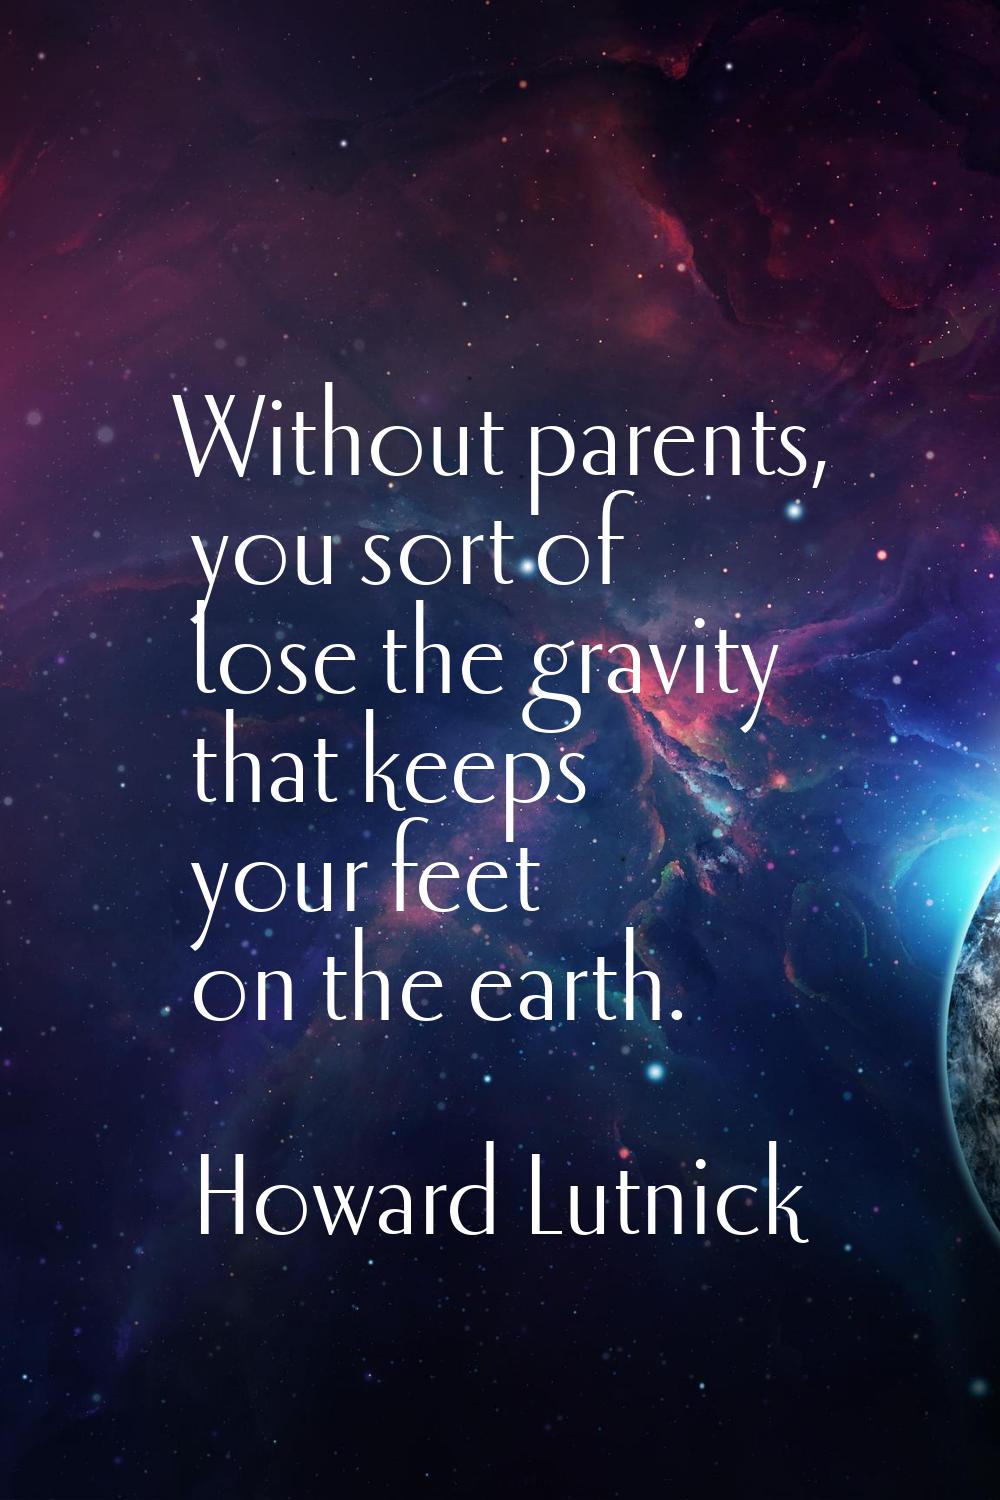 Without parents, you sort of lose the gravity that keeps your feet on the earth.